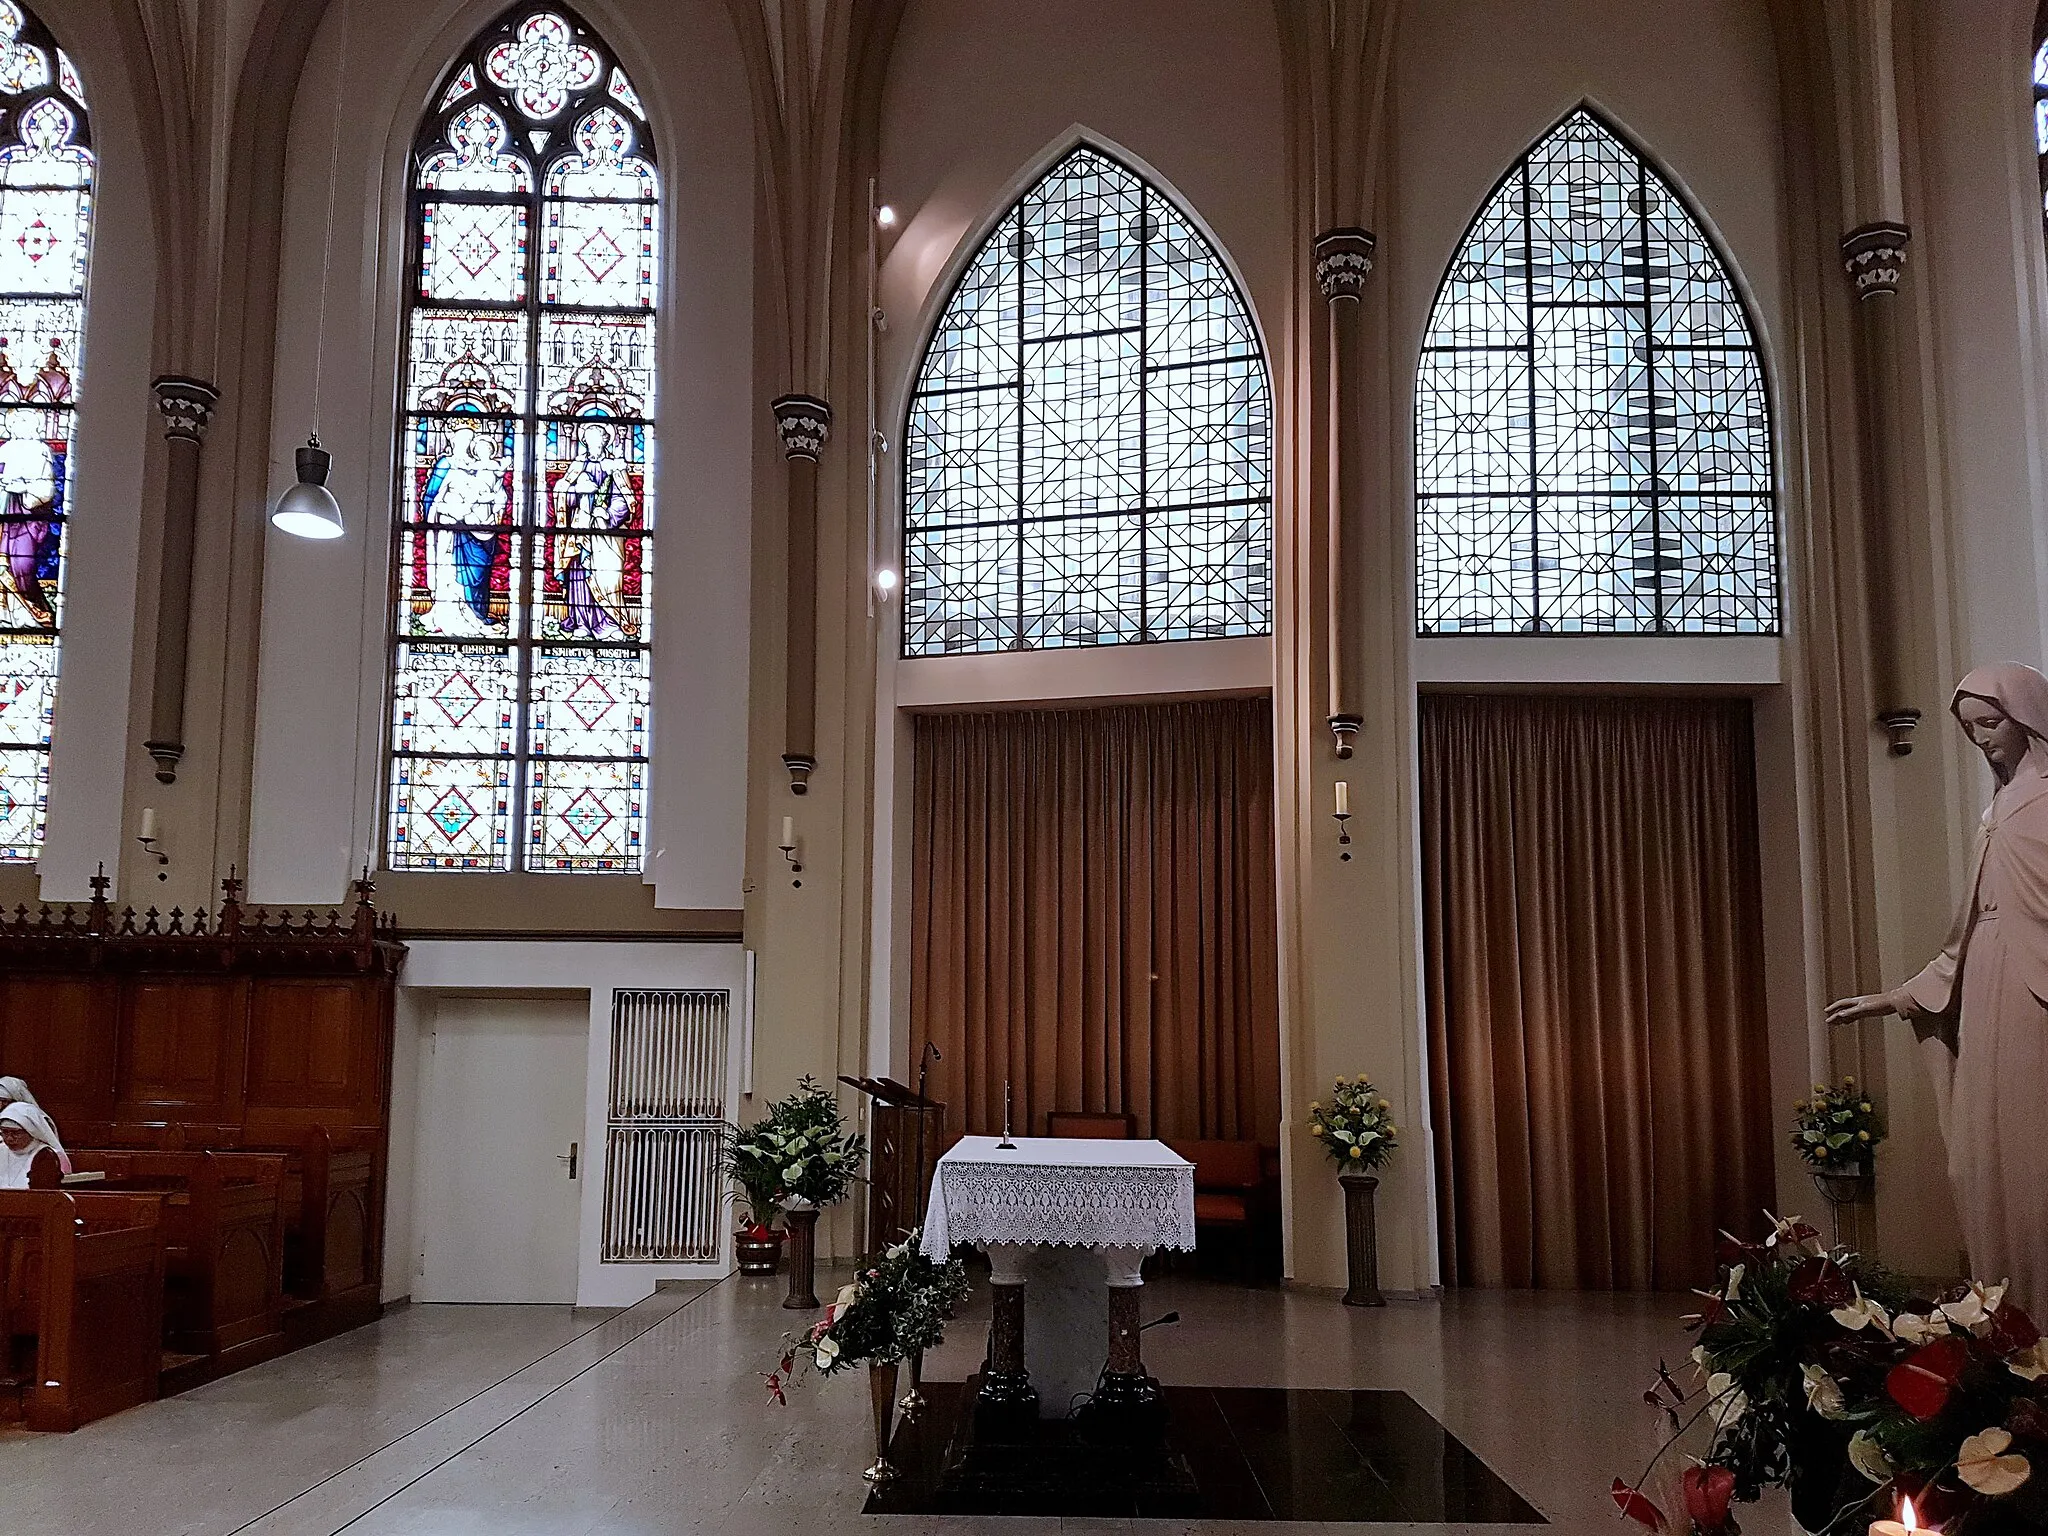 Photo showing: View from the devotional chapel into the private chapel of the Monastery of the Holy Ghost in Steyl (Venlo), the Netherlands. This is the mother house of the RC Congregation of the Servants of the Holy Spirit of Perpetual Adoration (Servae Spiritus Sancti de Adoratione Perpetua; SSpSAP). The devotional chapel is open to the public and allows for a view into the private chapel, where the Holy Sacrament is worshipped day and night by the "Pink Sisters".